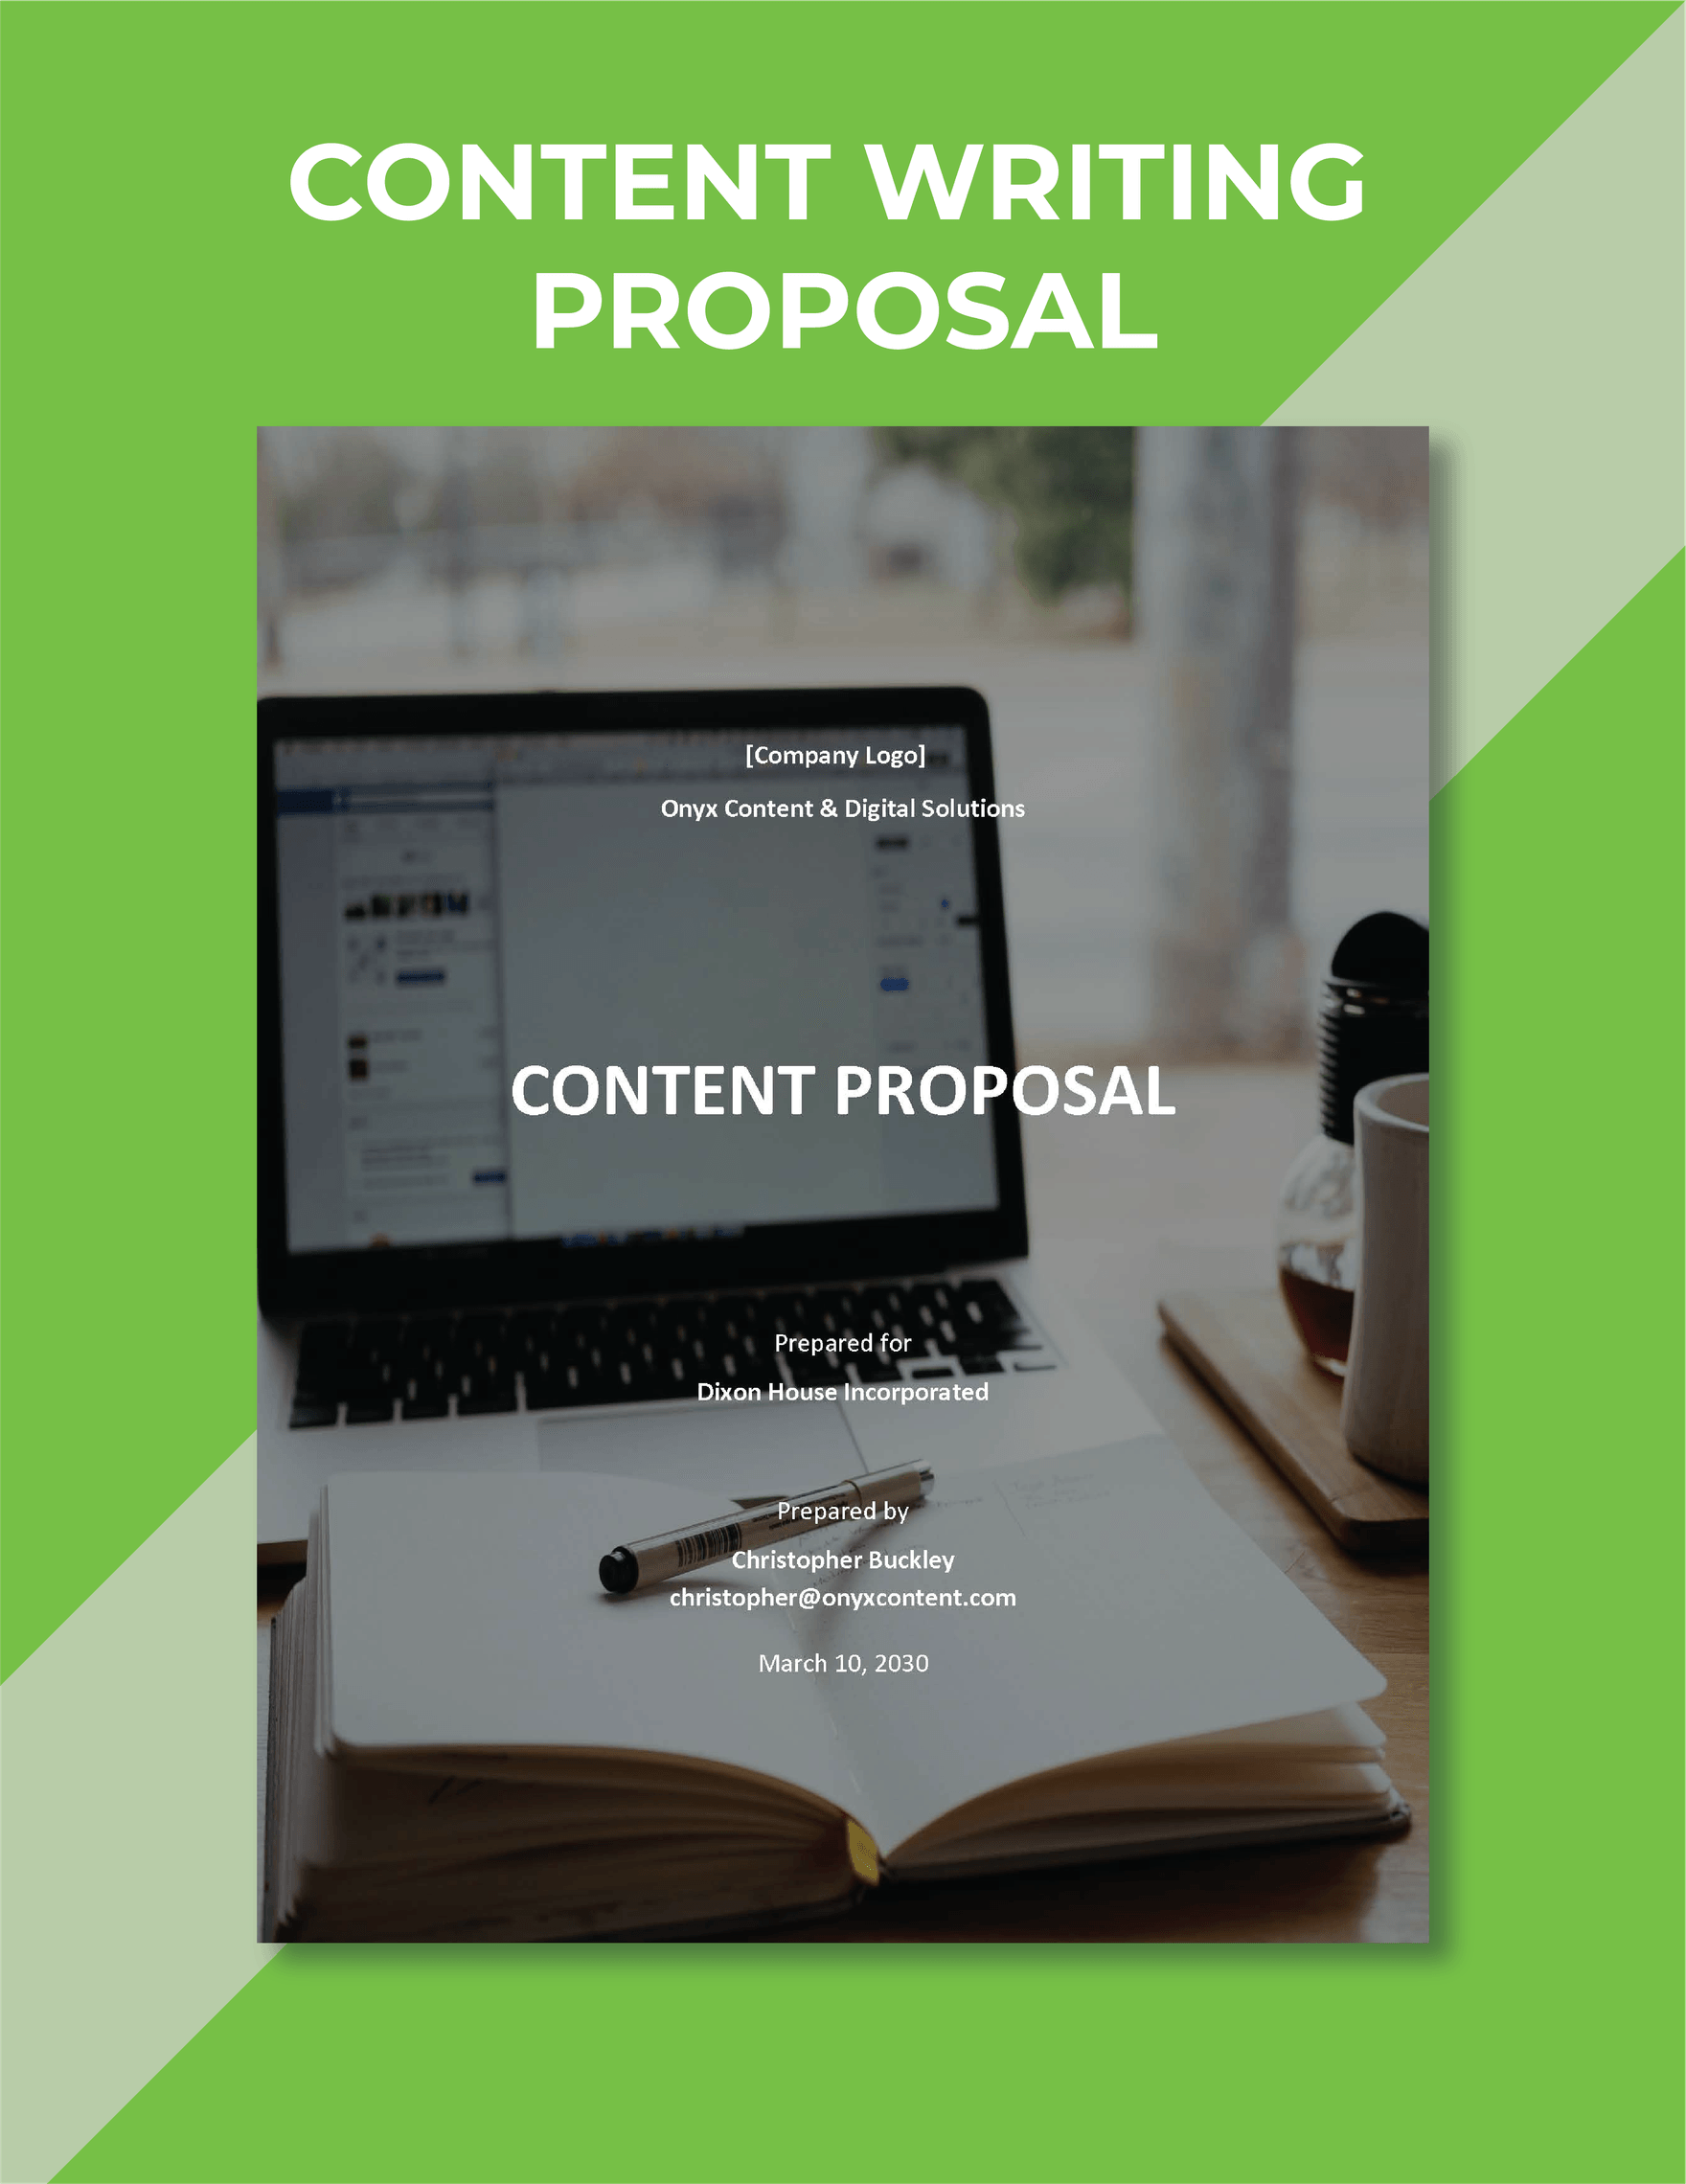 Content Writing Proposal Template in Word, Google Docs, Apple Pages